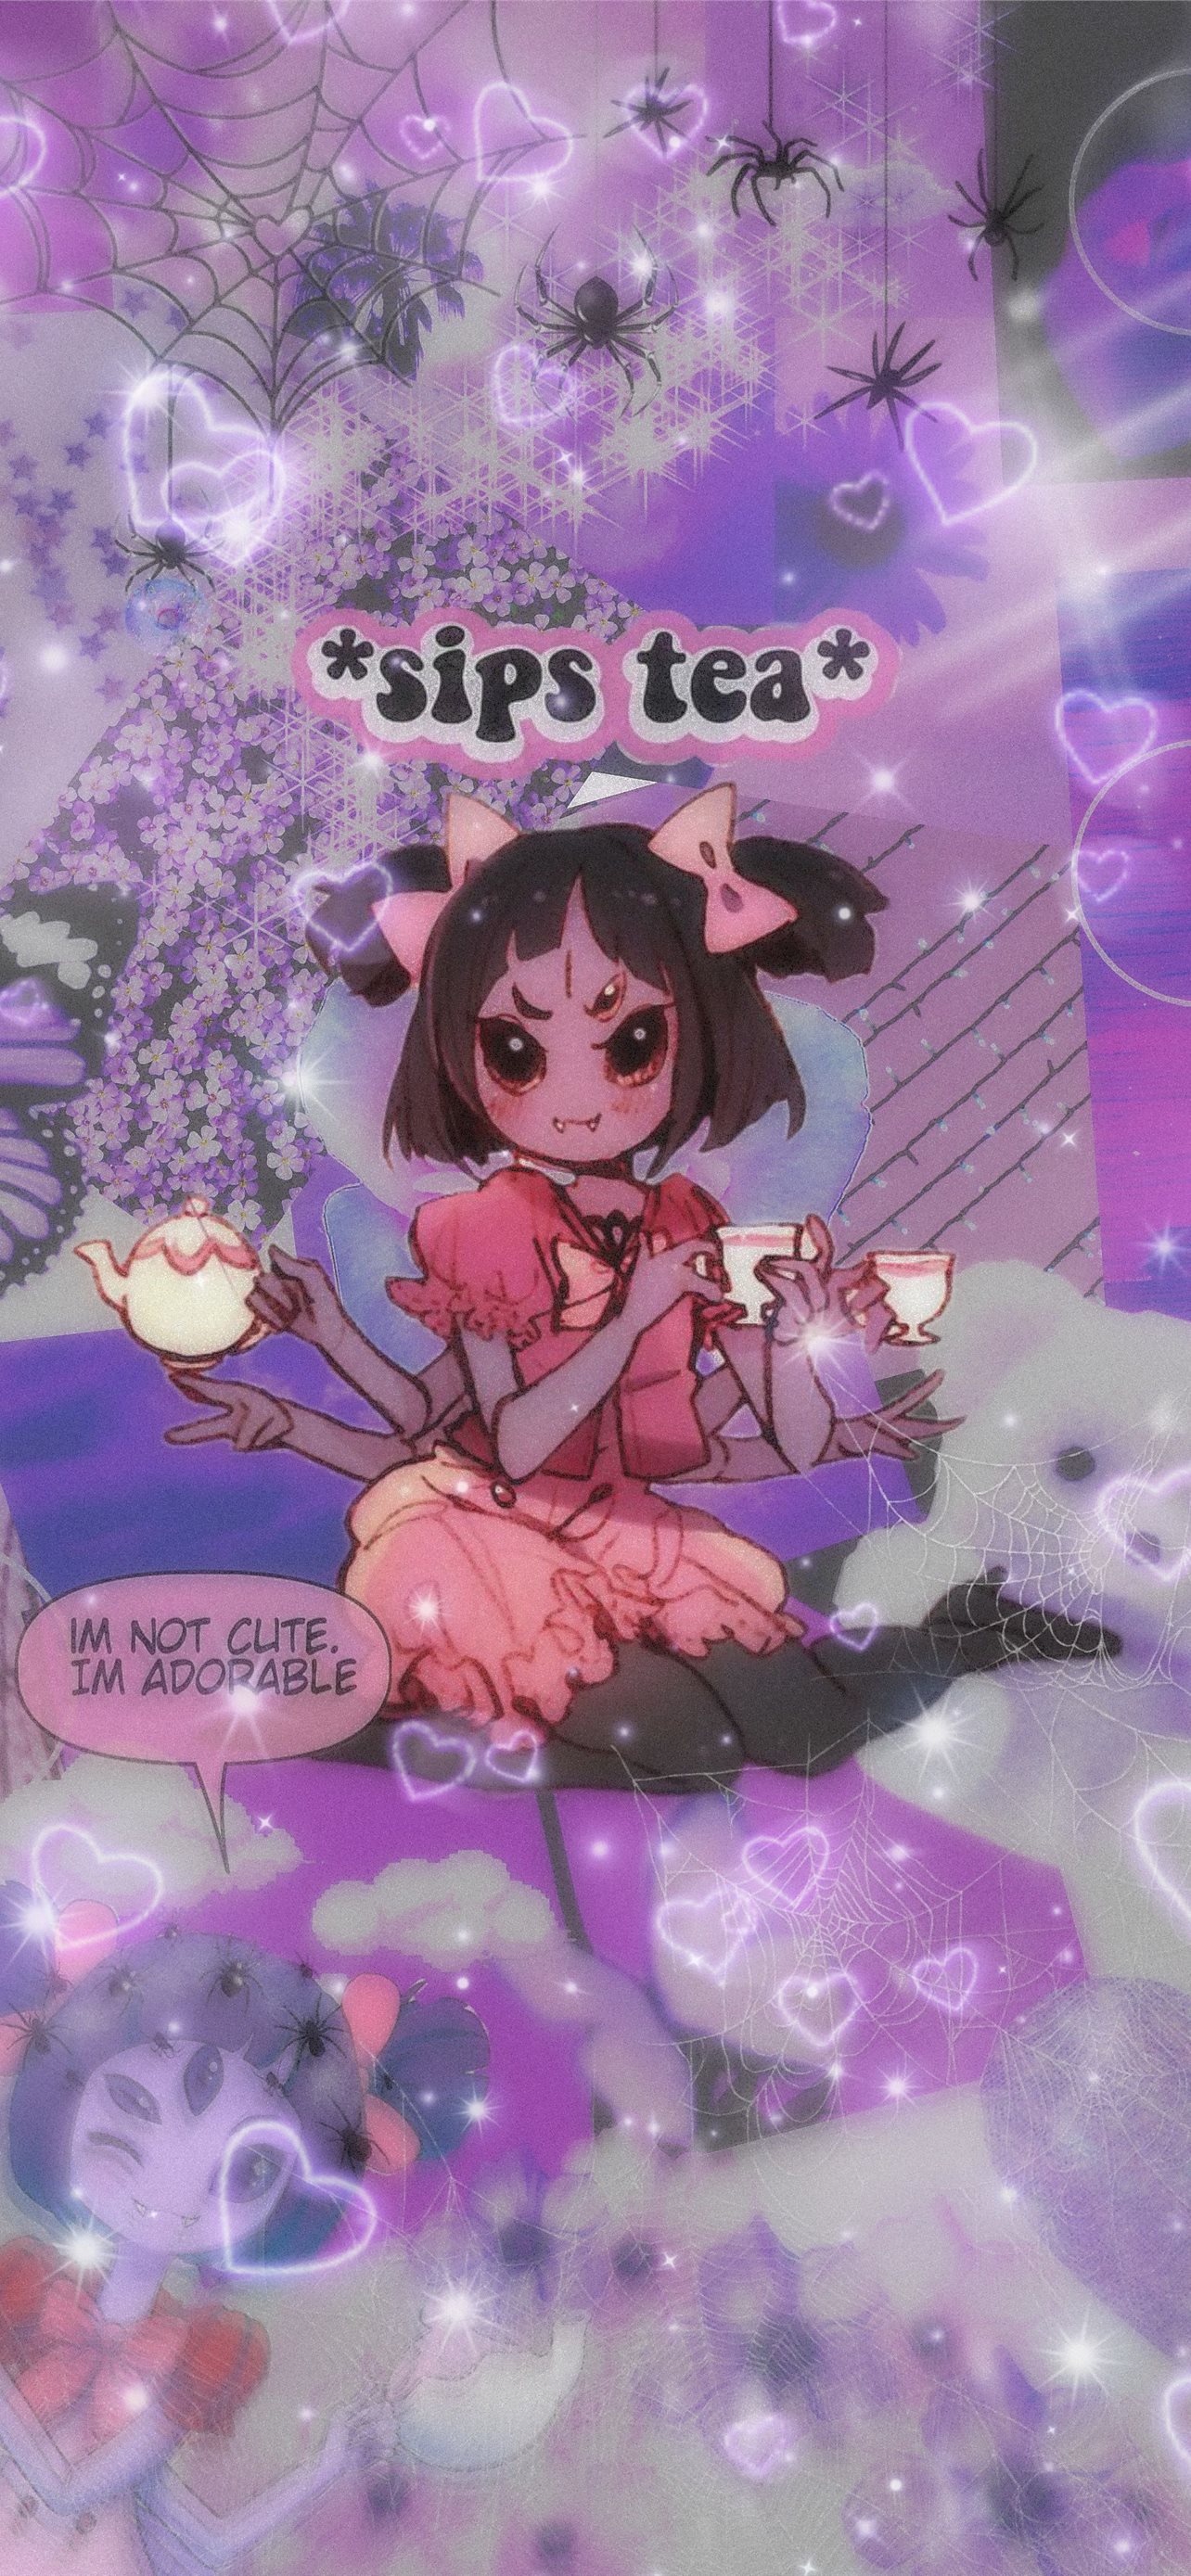 Muffet aesthetic iPhone Wallpaper Free Download